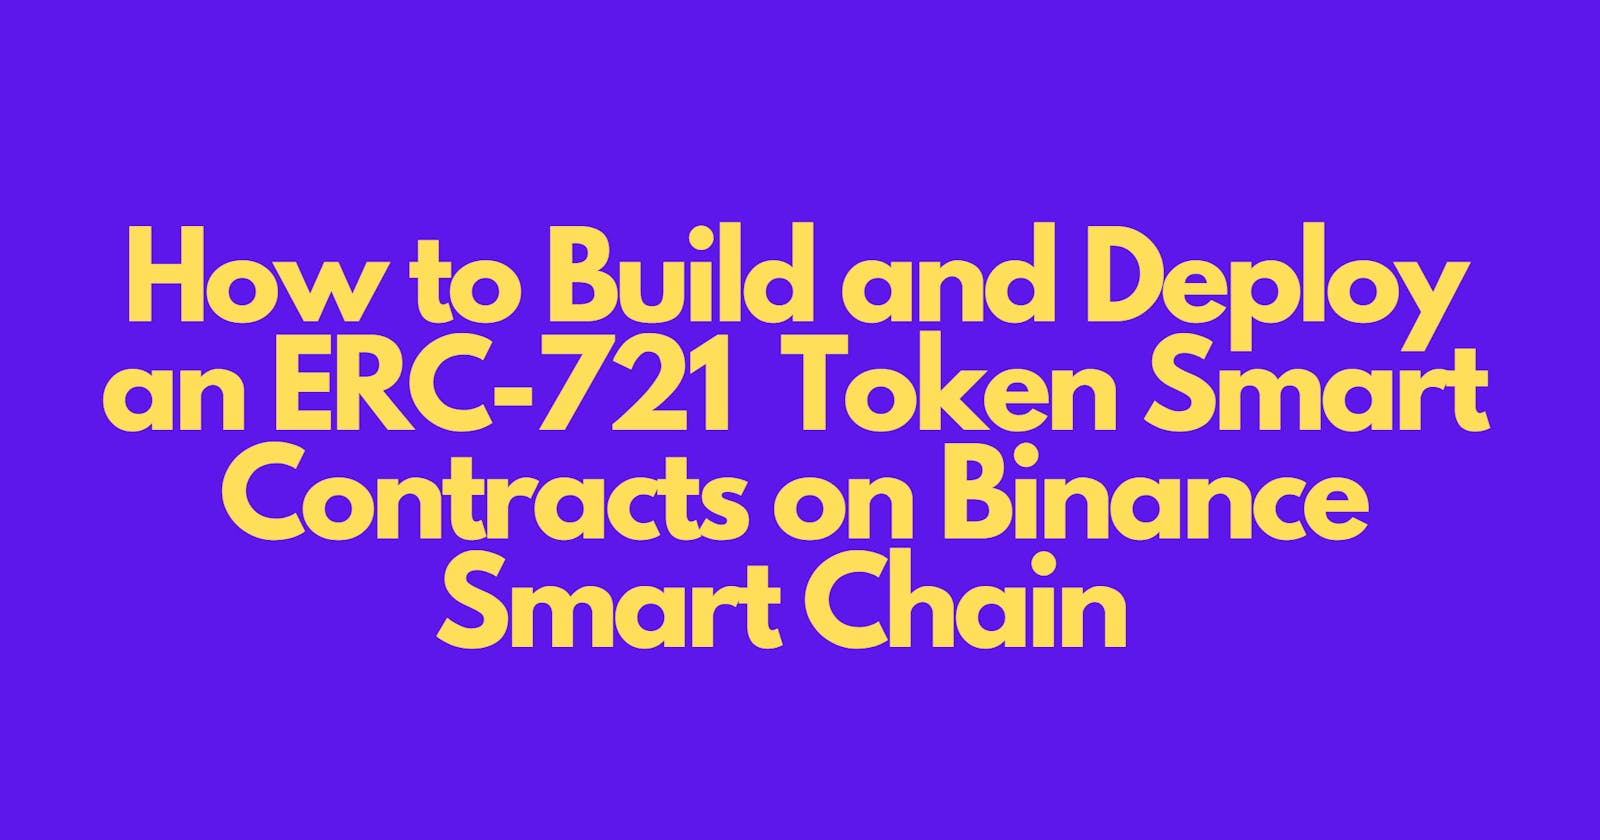 How to Build and Deploy an ERC-721  Token Smart Contract on Binance Smart Chain